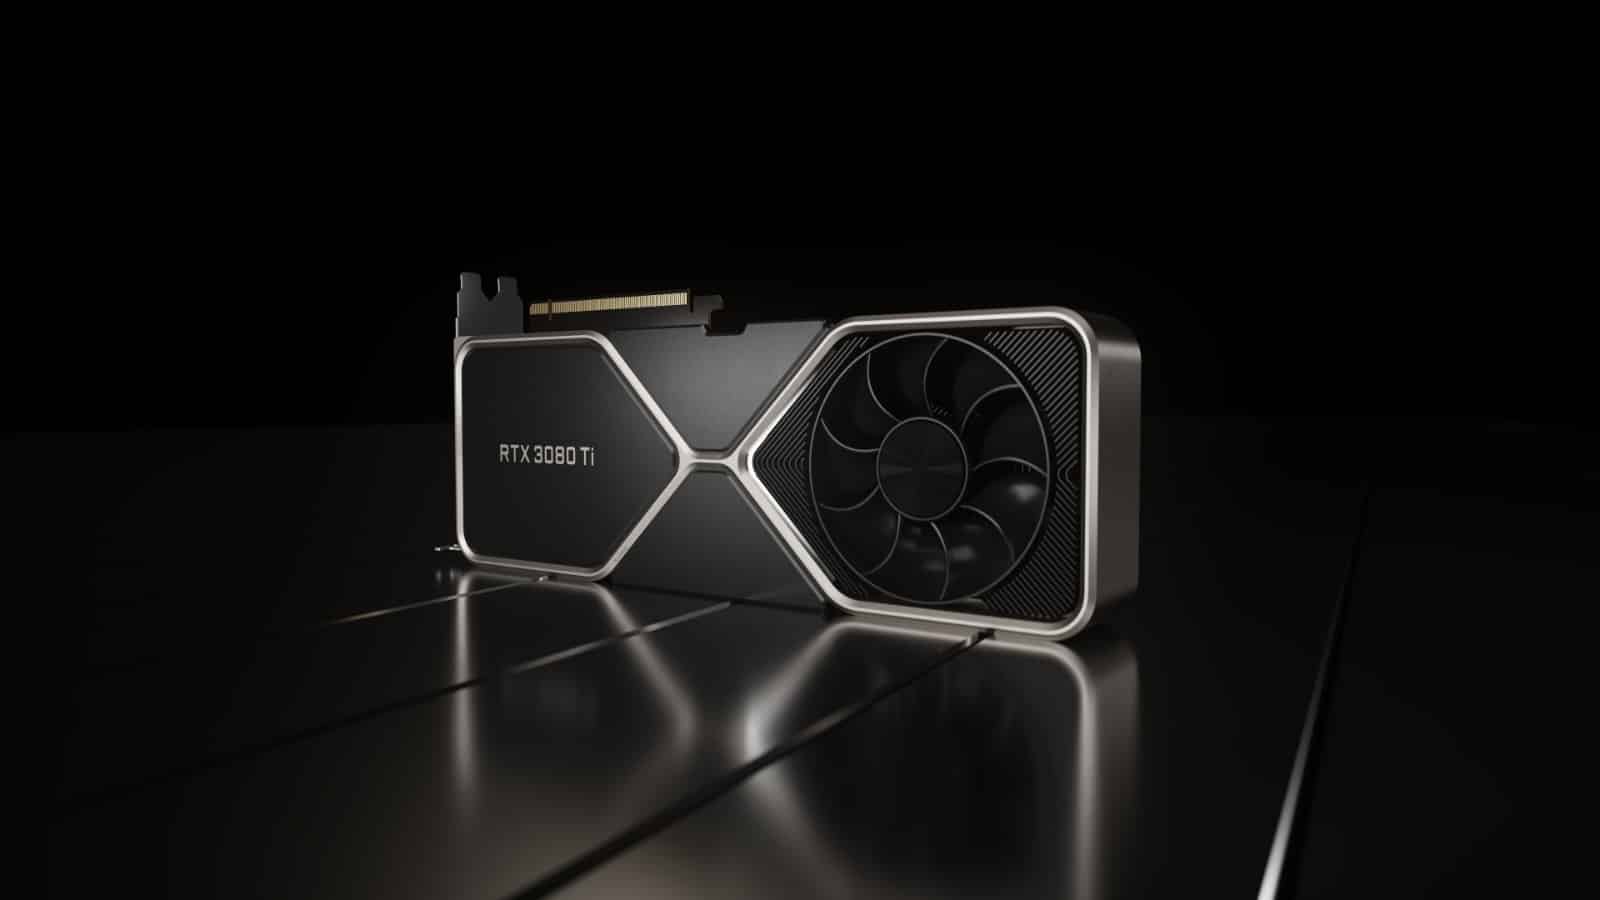 A render of the RTX 3080 Ti graphics card